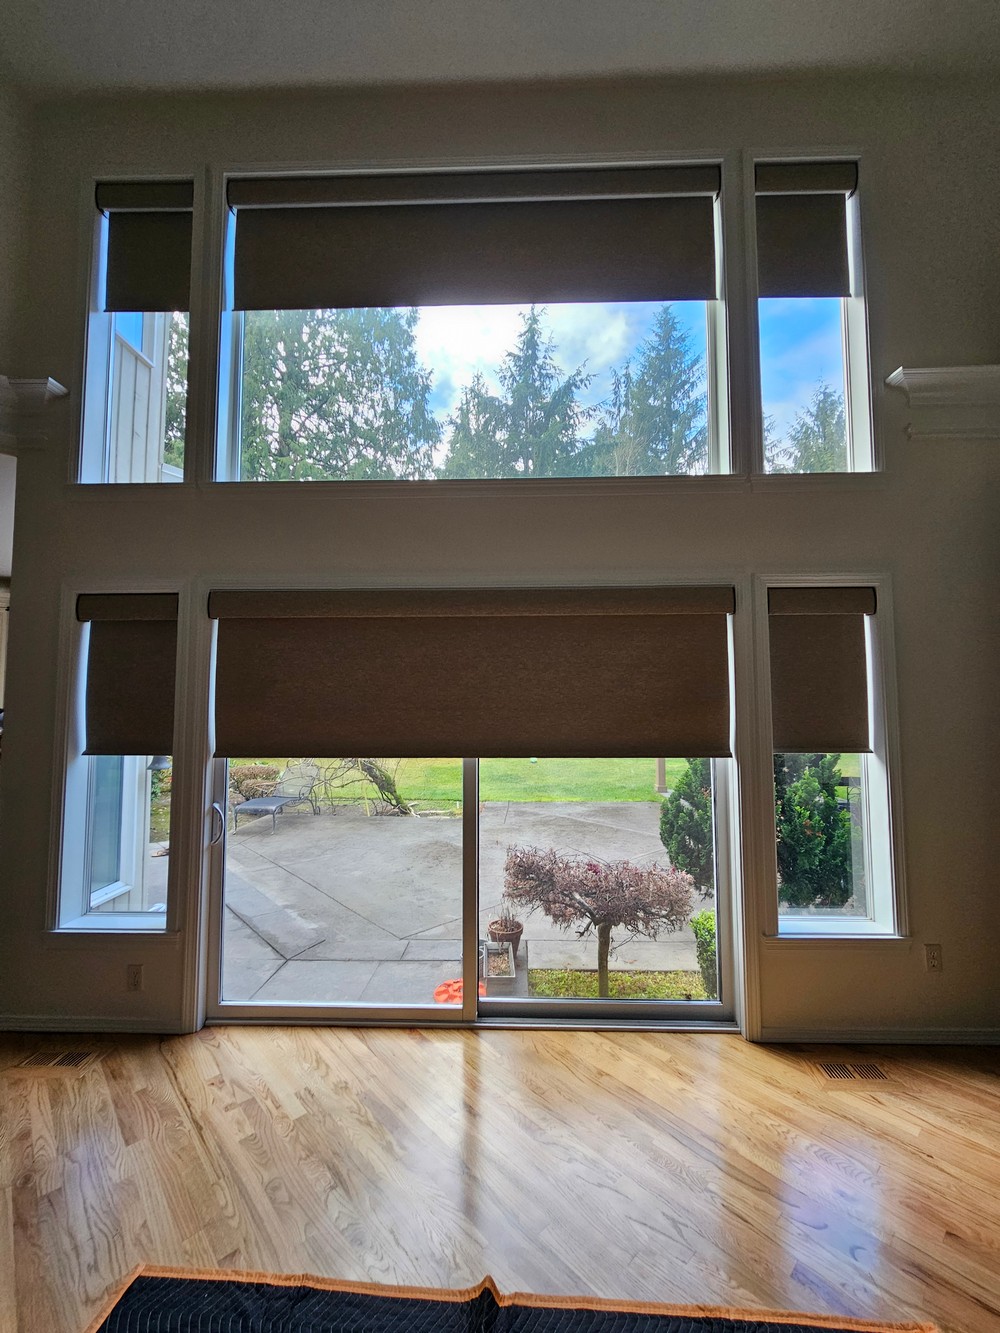 Outstanding Lutron Triathlon Automated Roller Shades on 81st Ave SE in Woodinville, WA Image